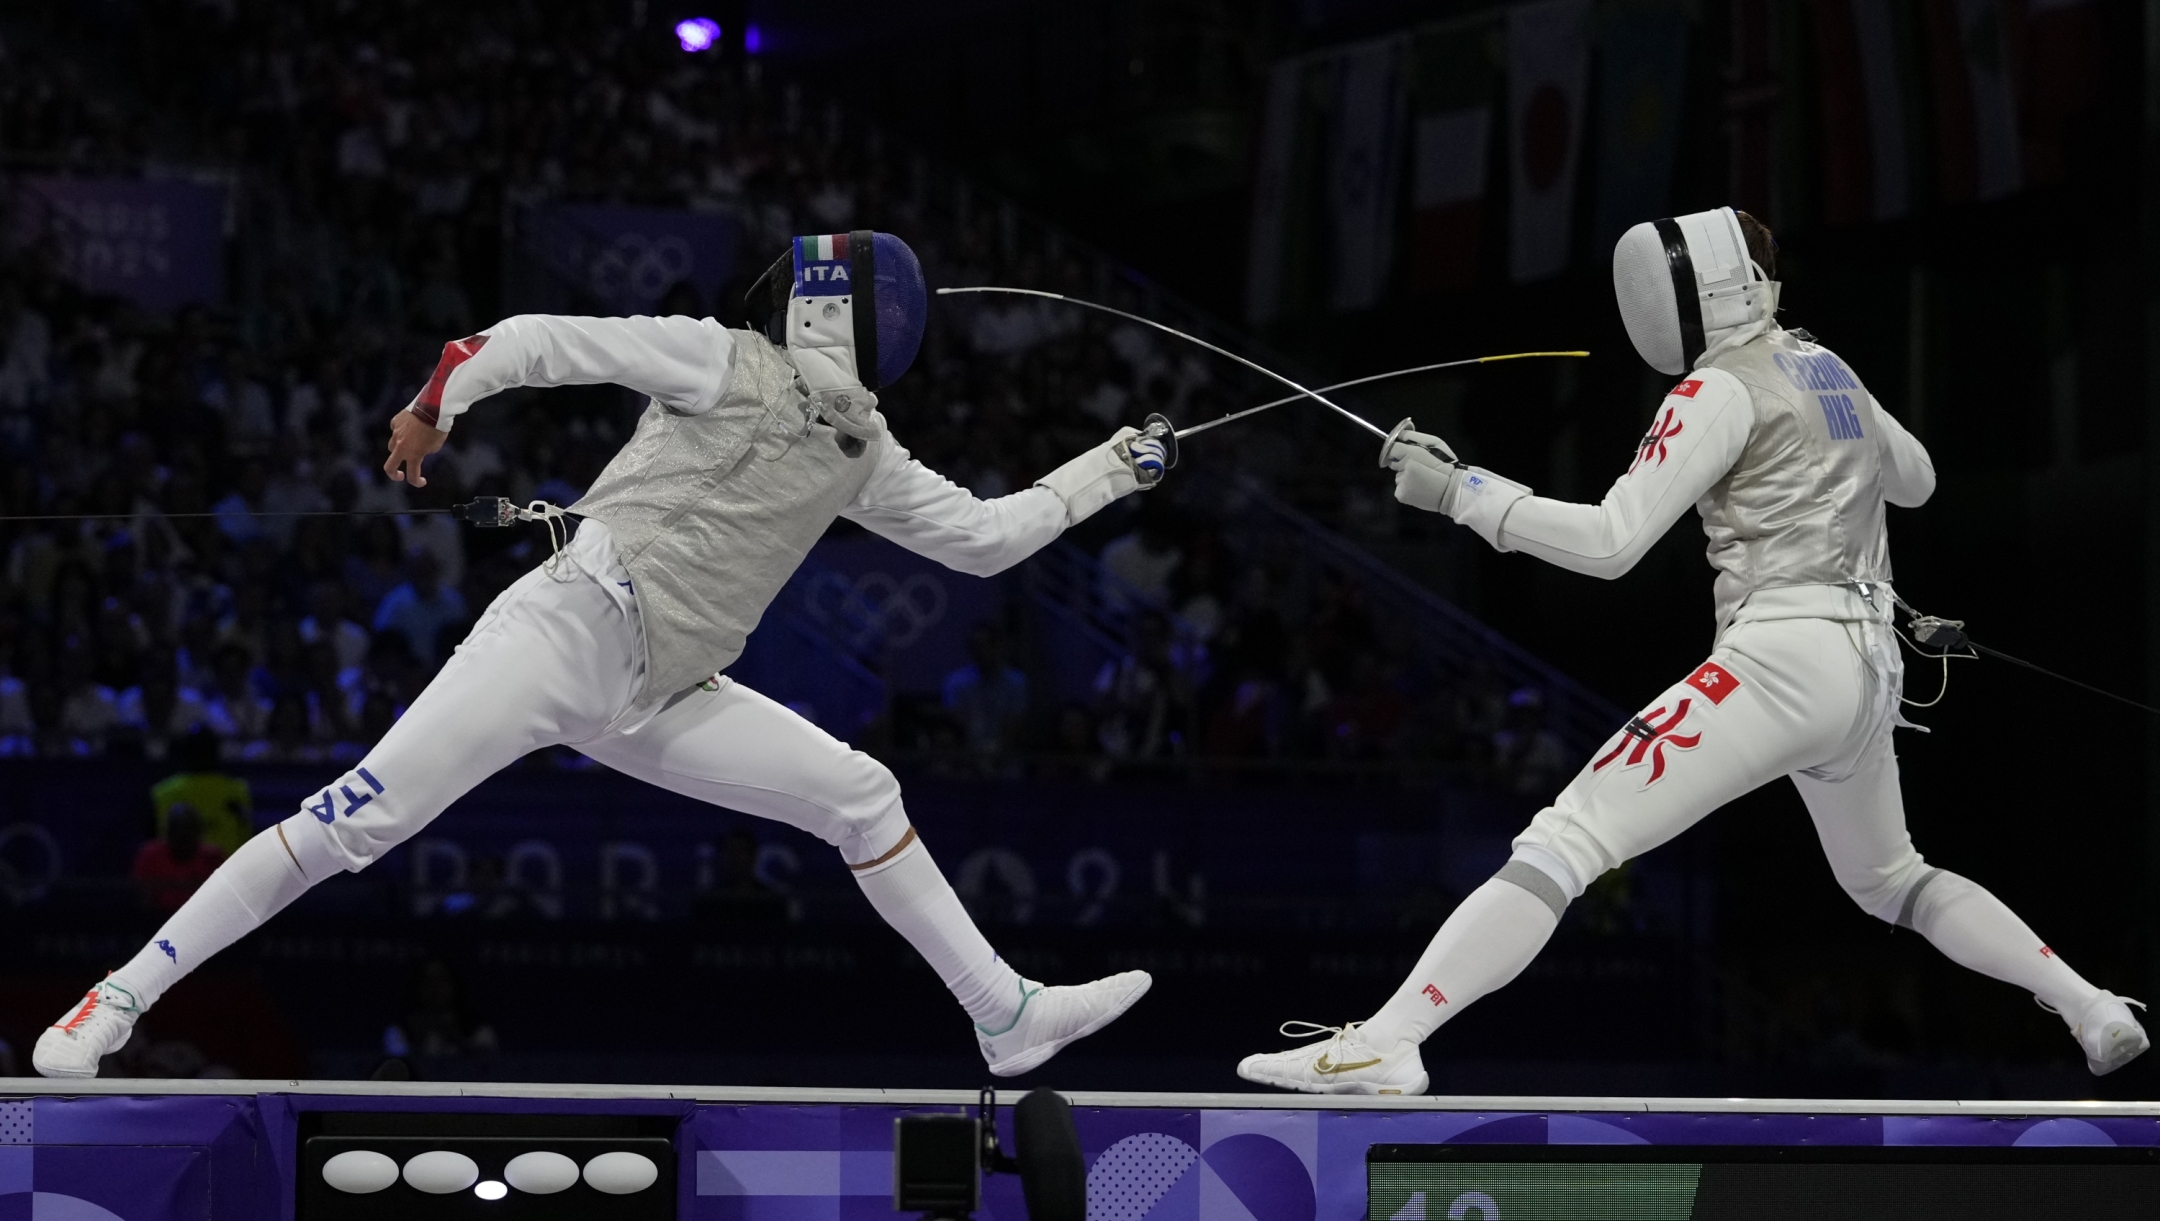 Hong Kong's Cheung Ka long, right, competes with Italy's Filippo Macchi in the men's individual Foil final match during the 2024 Summer Olympics at the Grand Palais, Monday, July 29, 2024, in Paris, France. (AP Photo/Andrew Medichini)